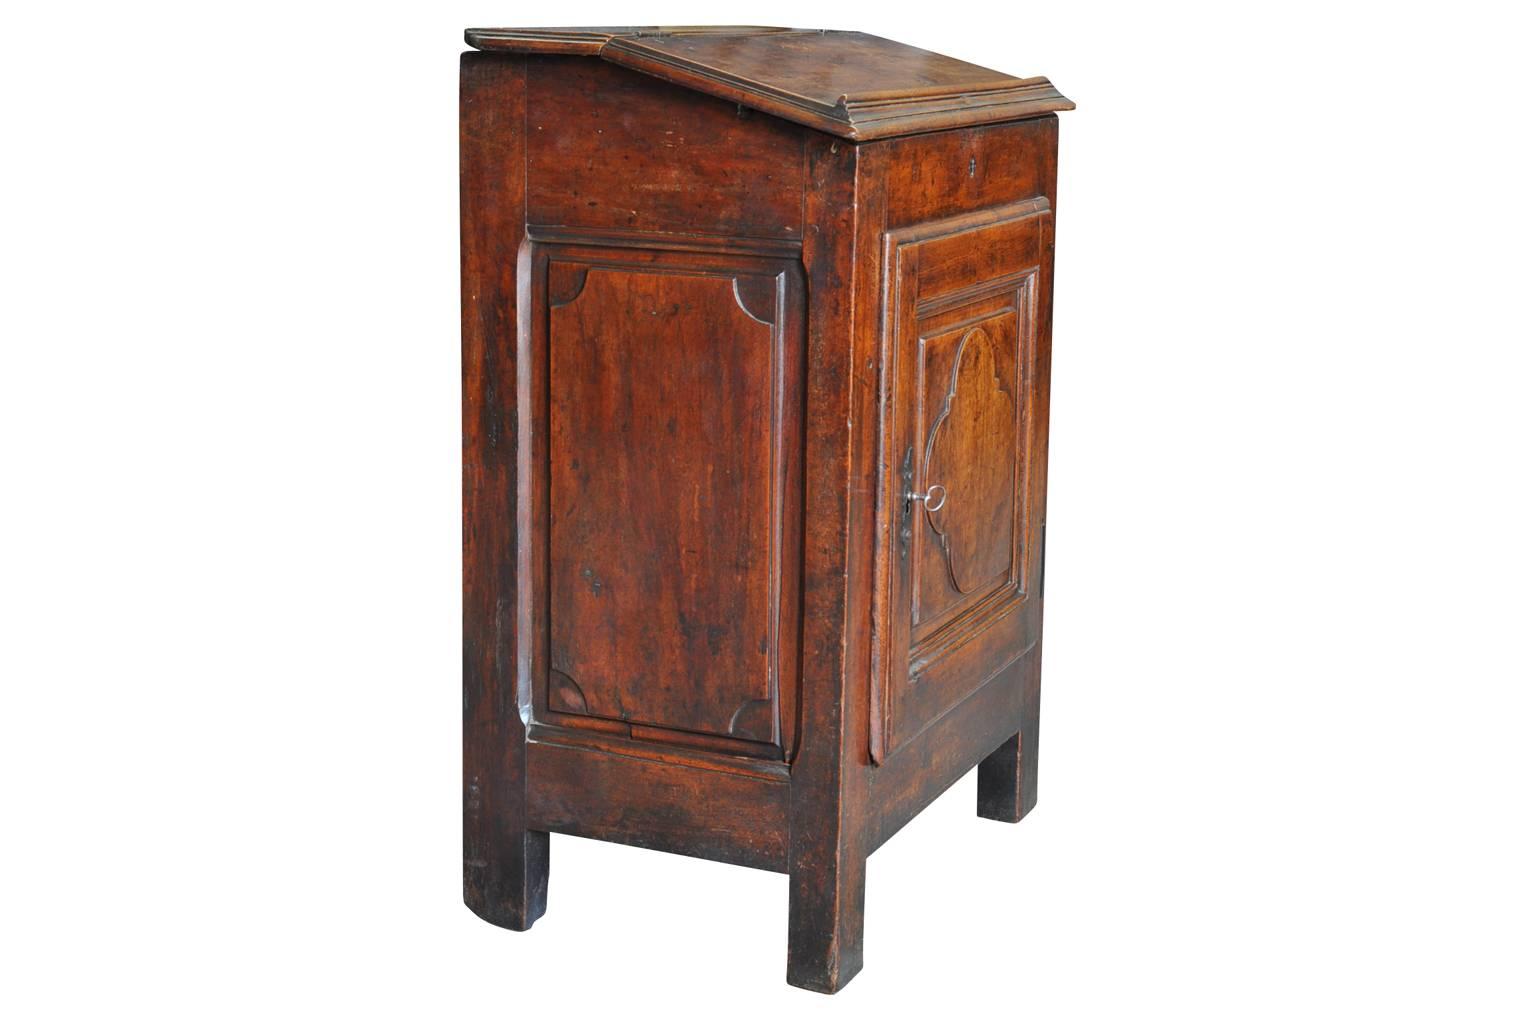 A charming French, 18th century Ecritoire side cabinet. Beautifully constructed from walnut. A wonderful accent piece for any living area.